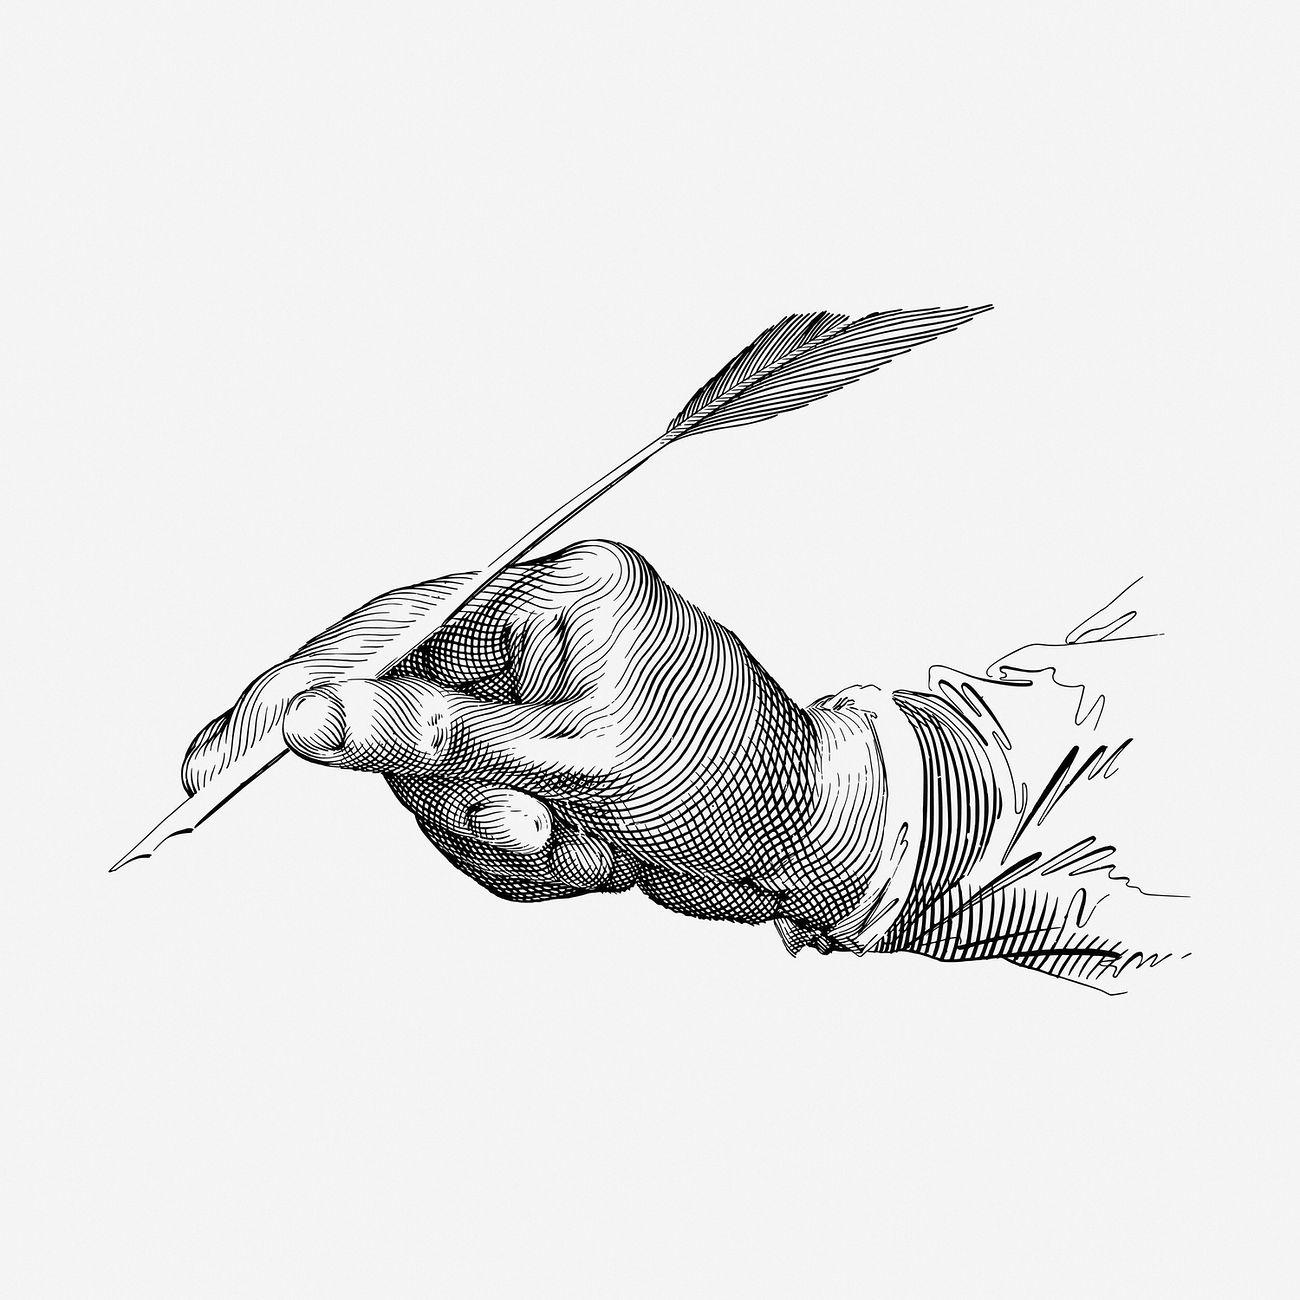 Quill writing hand drawn